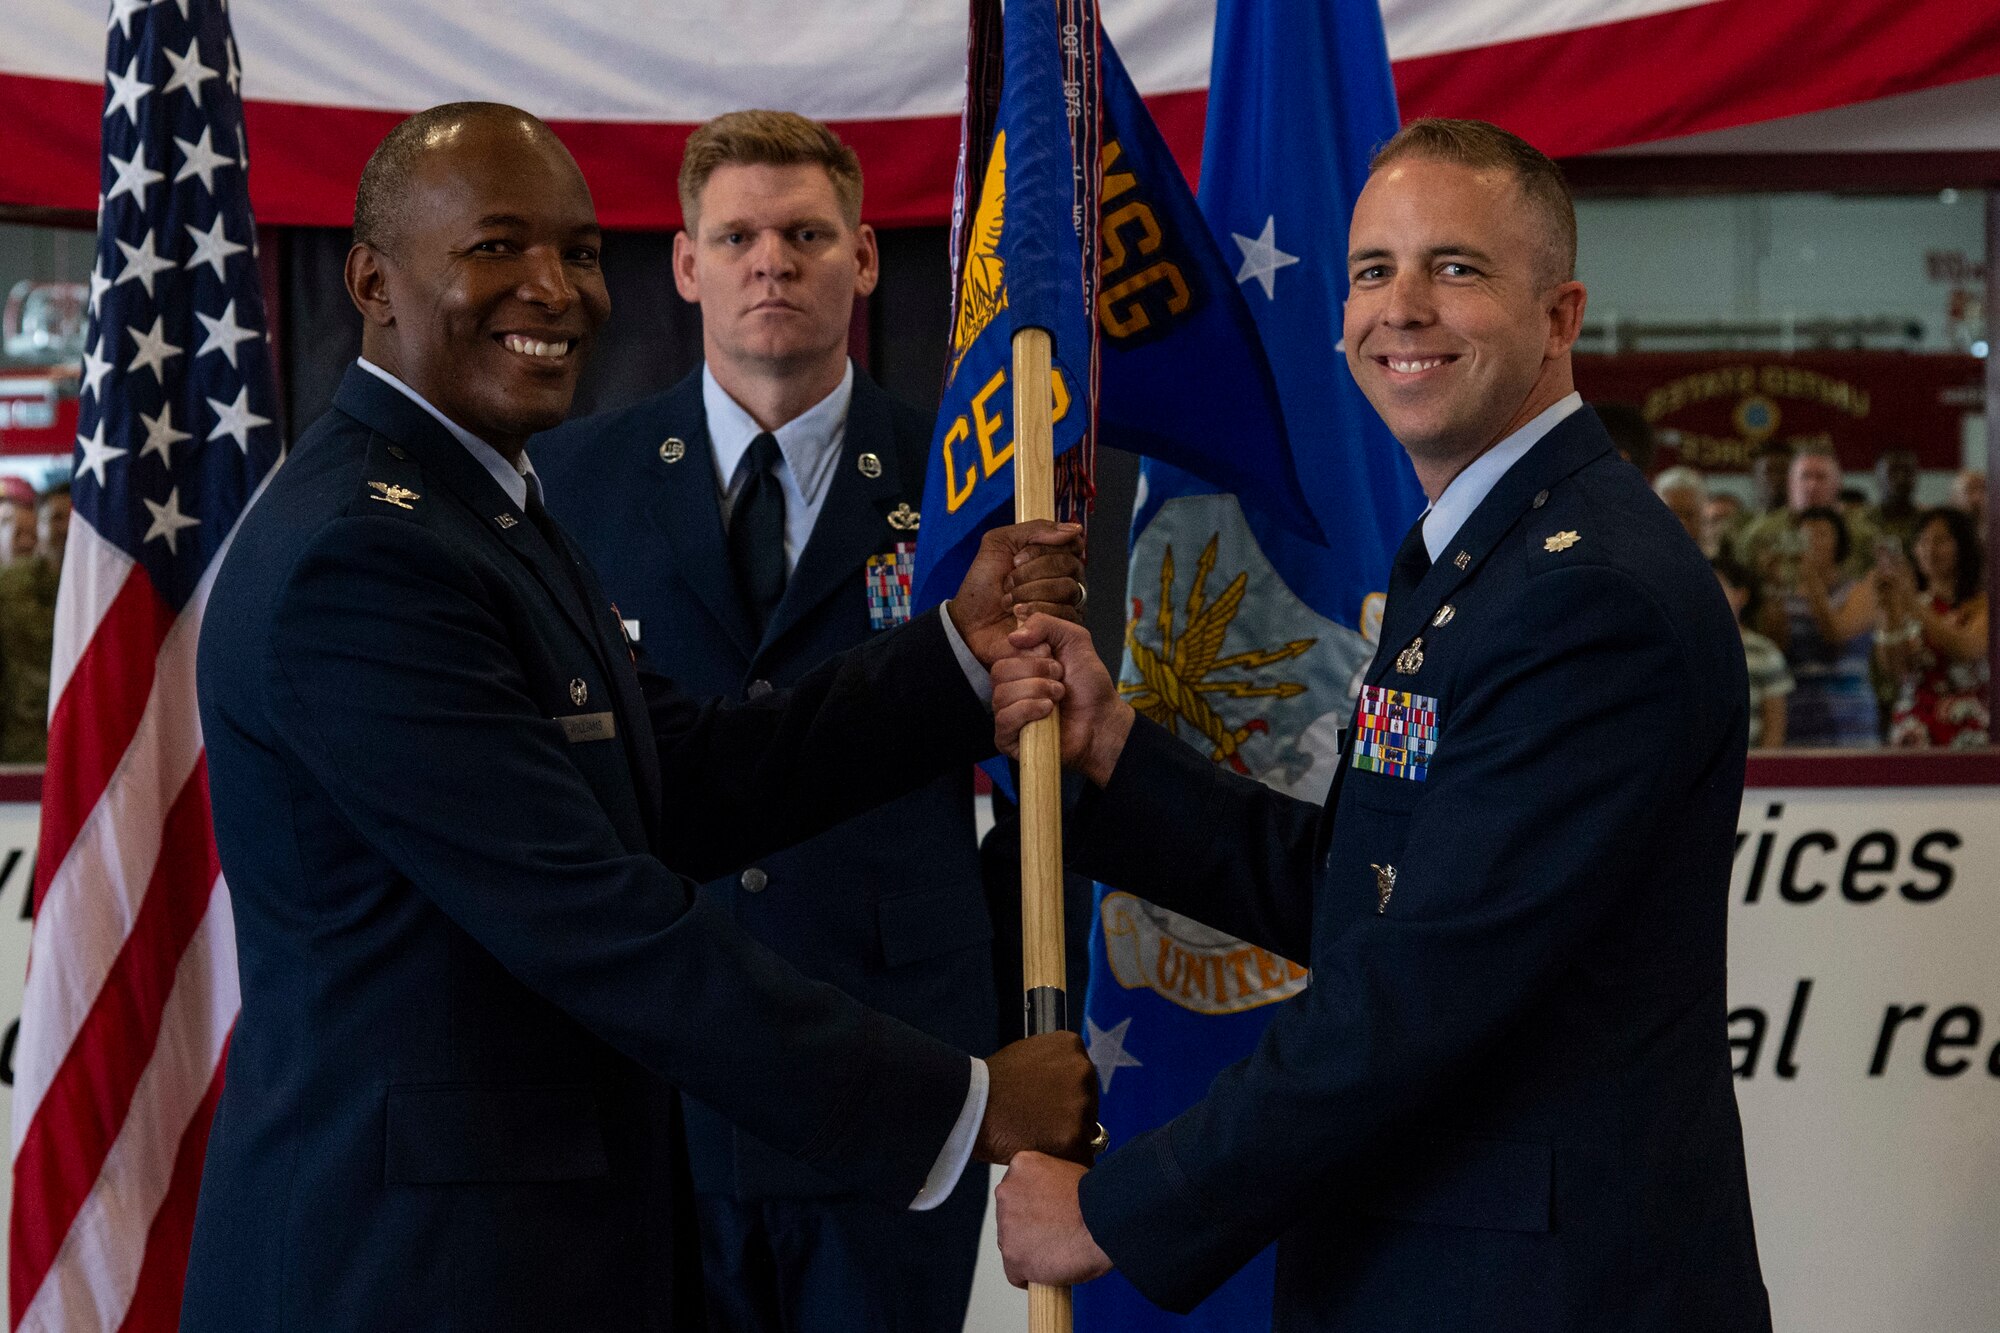 Lt. Col. Joshua Yerk, right, 436th Civil Engineer Squadron commander, assumes command of the 436th CES from Col. Phelemon Williams, left, 436th Mission Support Group commander, during a change of command ceremony held at the base fire station on Dover Air Force Base, Delaware, June 23, 2022. Team Dover Airmen, family members and guests watched Yerk assume command of the 436th CES. Guidon bearer for the ceremony was Chief Master Sgt. Andrew Kehl, center, 436th CES fire chief. (U.S. Air Force photo by Roland Balik)